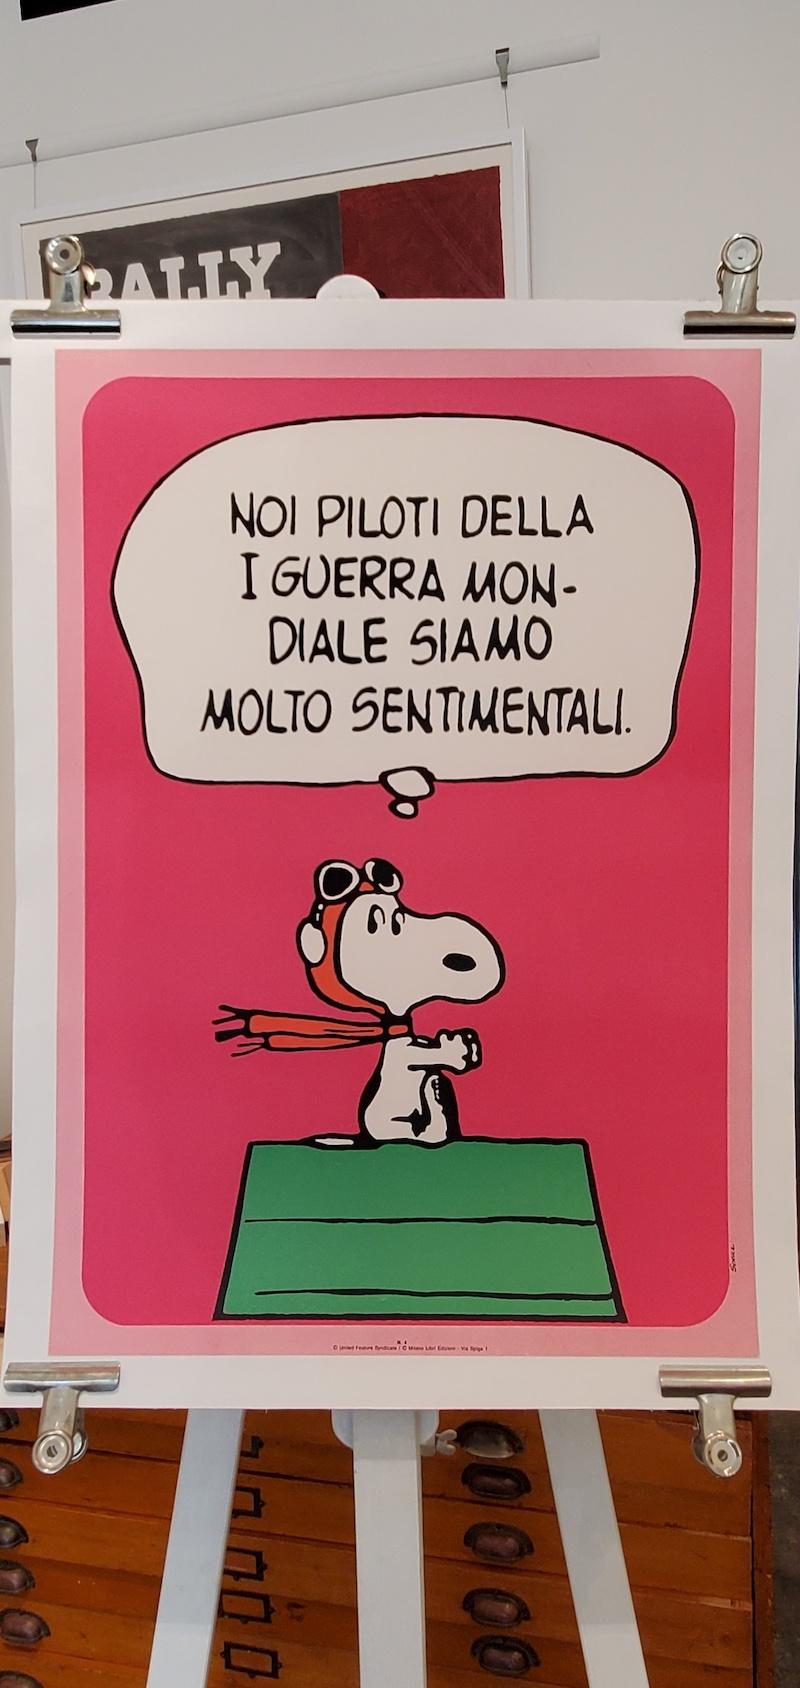 SNOOPY Original Italian Vintage Poster by Schulz c. 1960

This is an original poster, circa 1960 featuring Snoopy with the slogan, “We First War pilots are very sentimental” .

This poster has been linen backed for preservation, the colours are